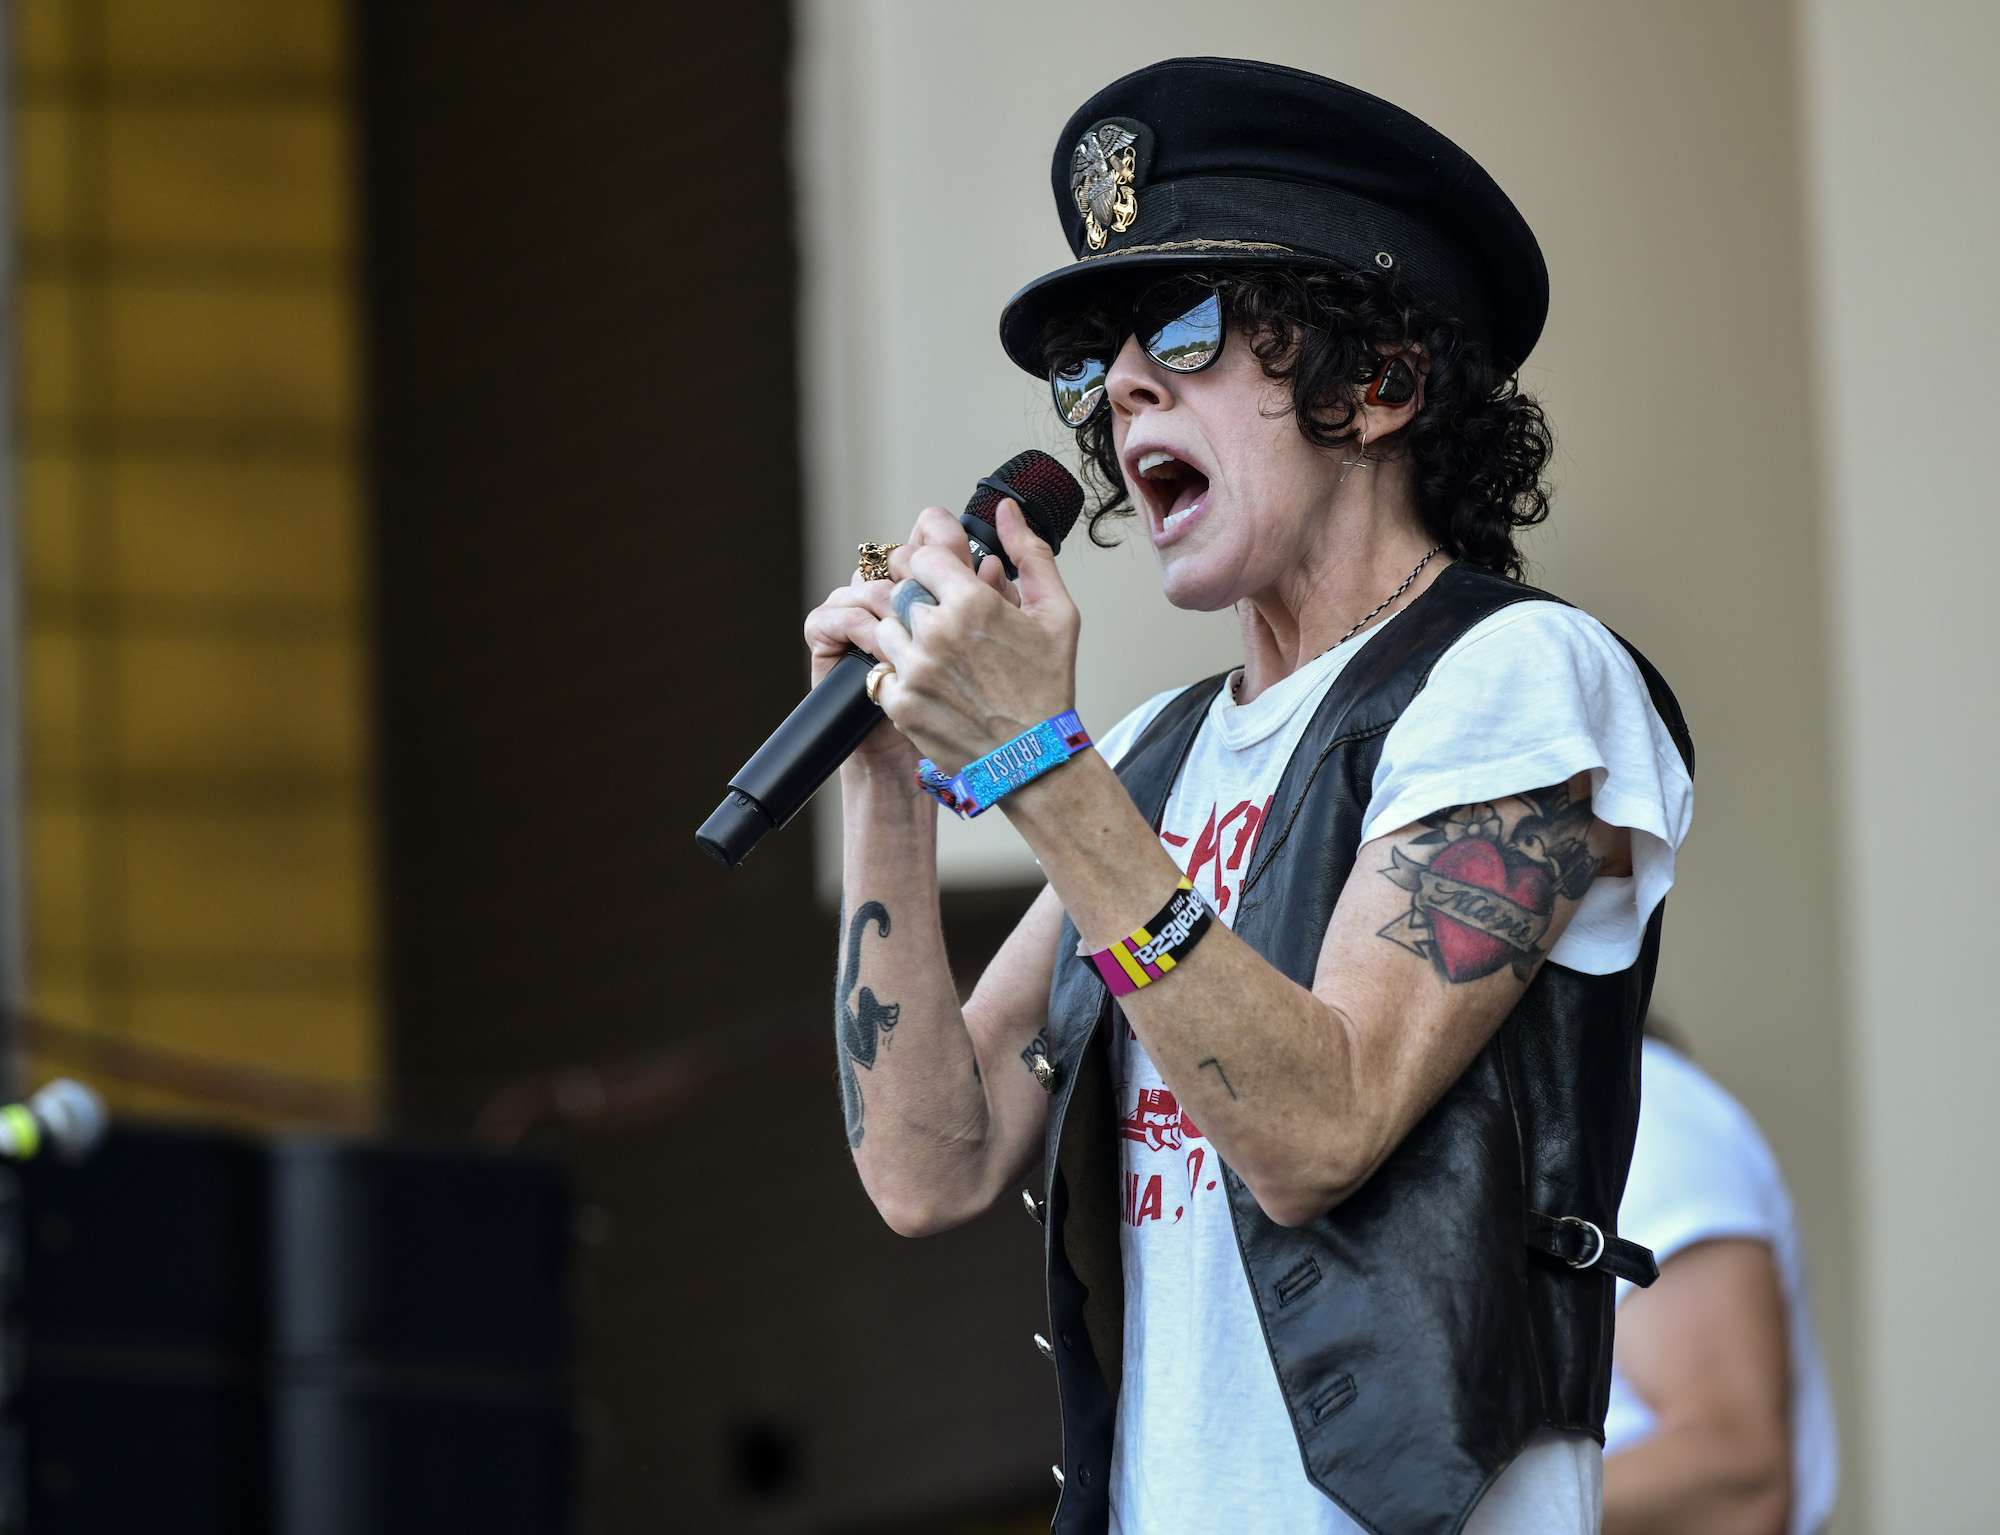 LP Live at Lollapalooza [GALLERY] 3